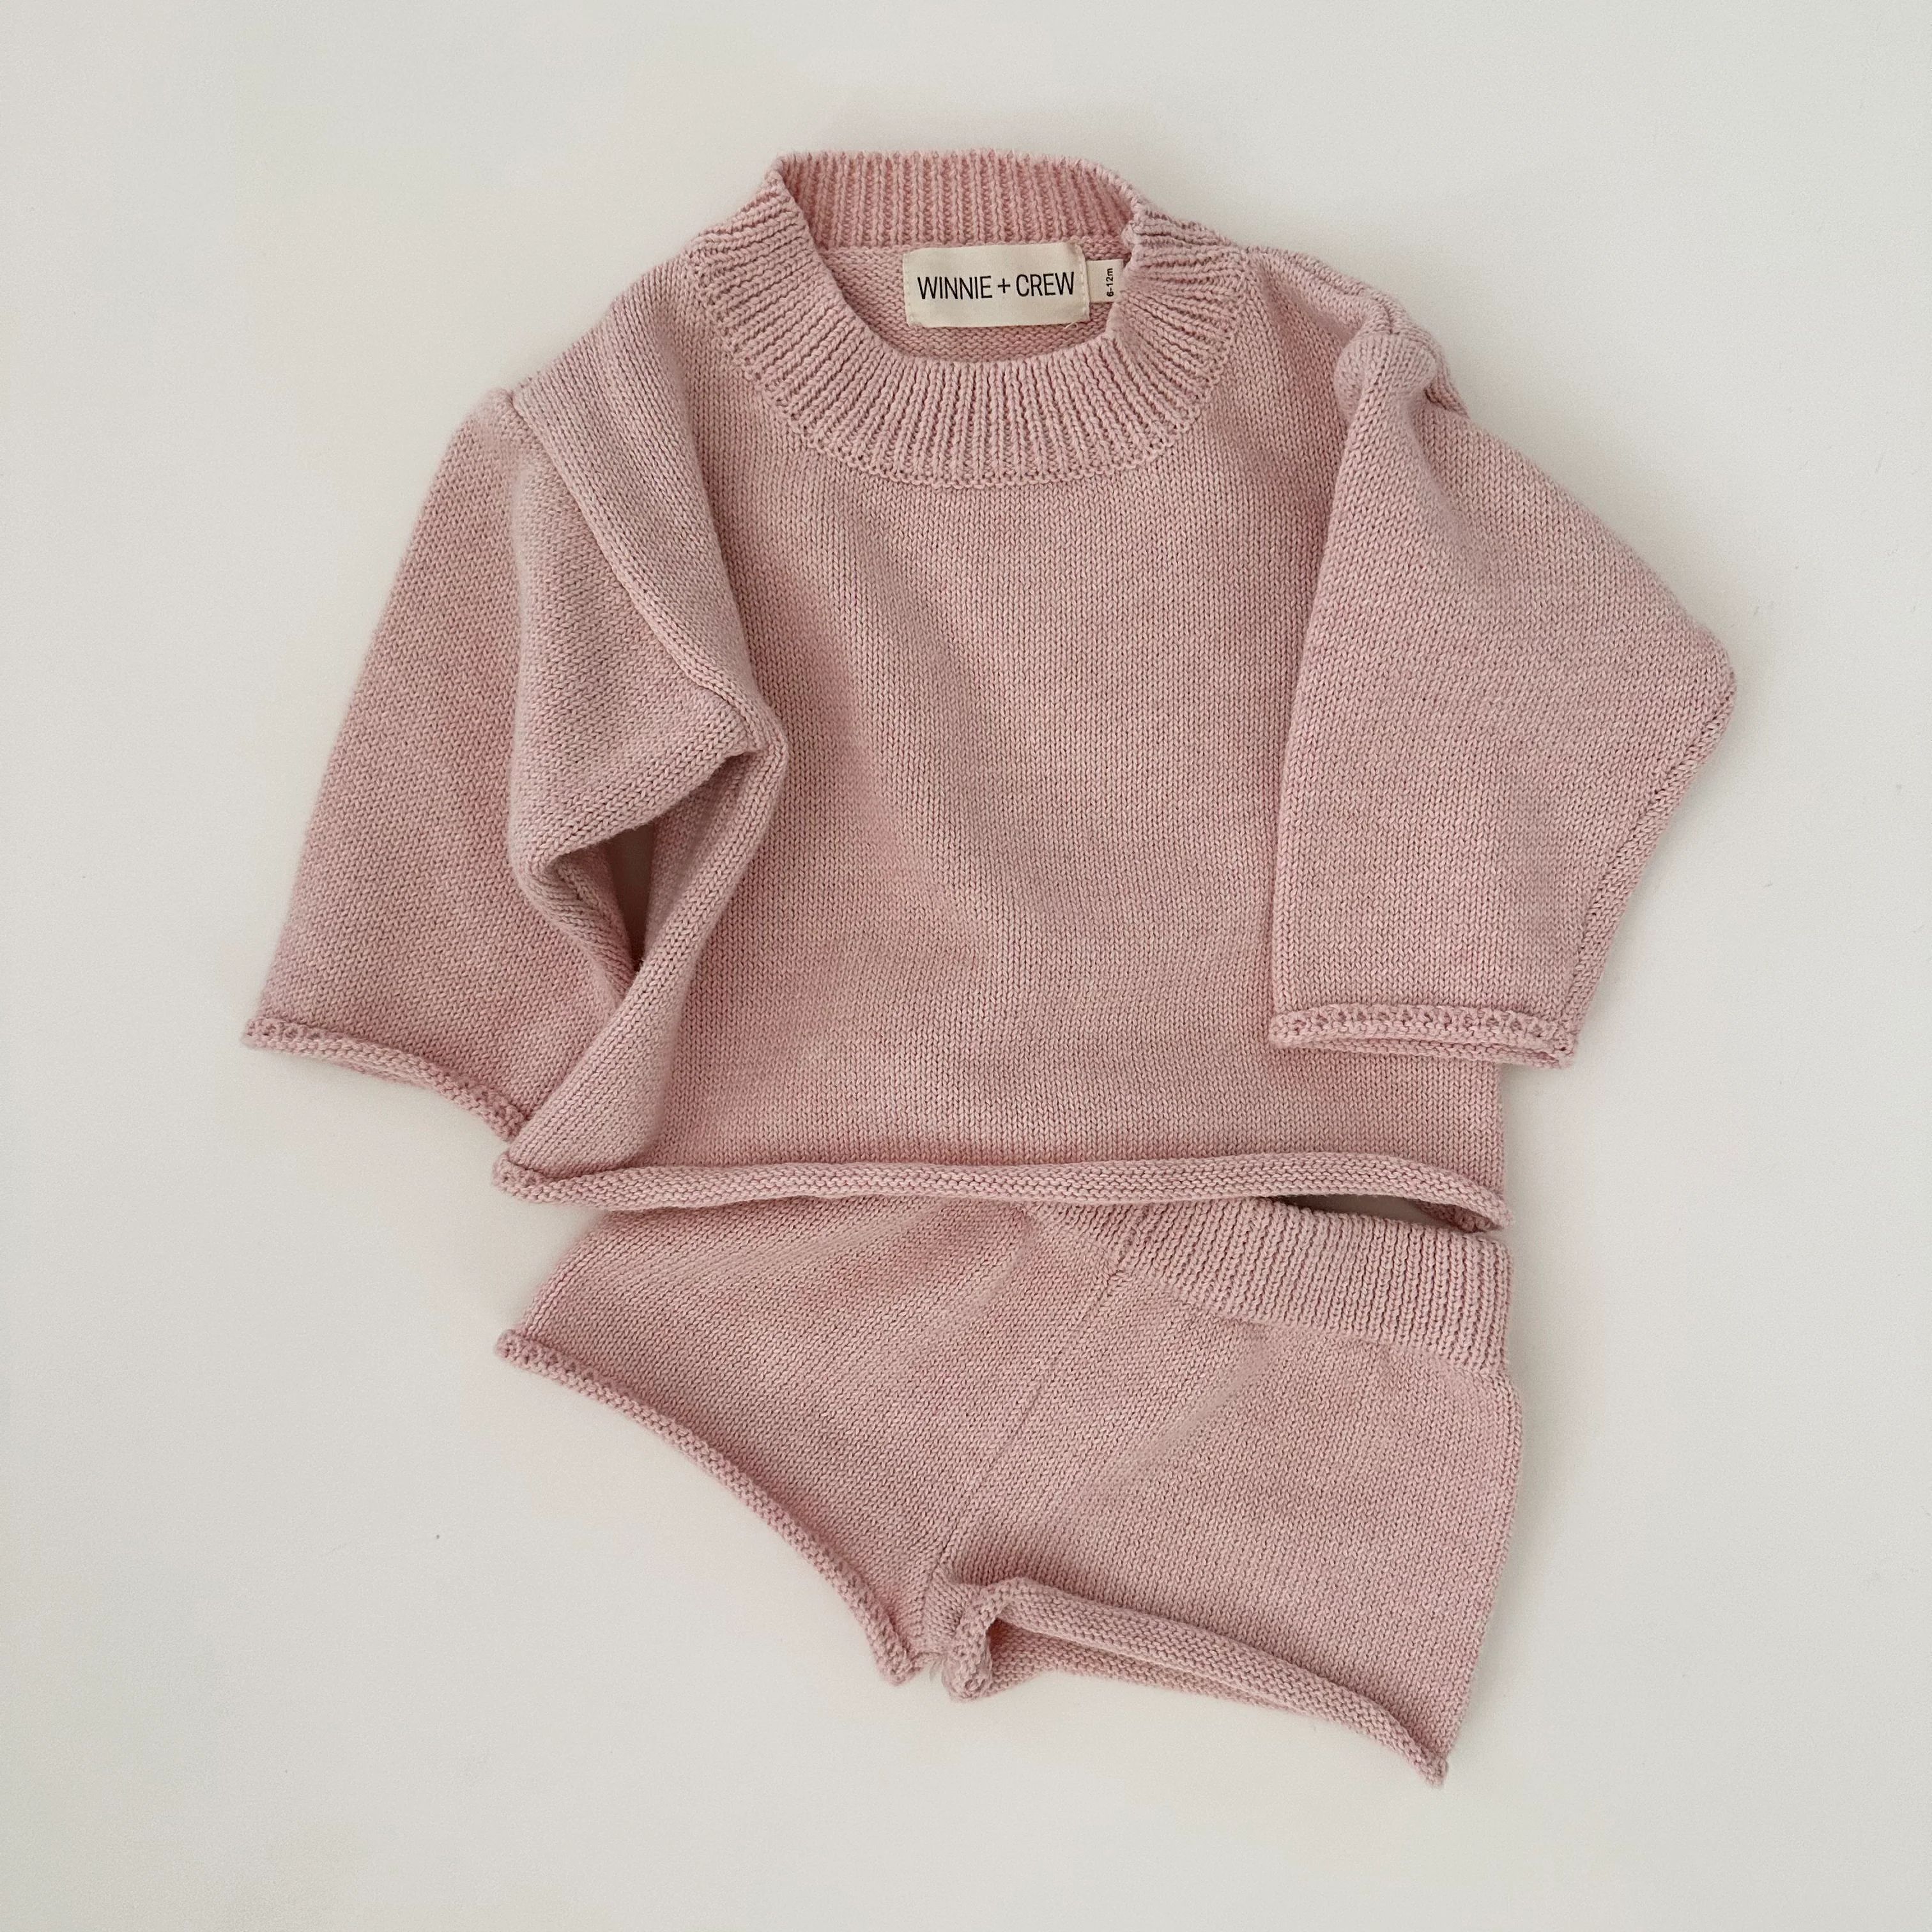 Bowie Knit Set | Baby + Toddler Clothing | Winnie and Crew